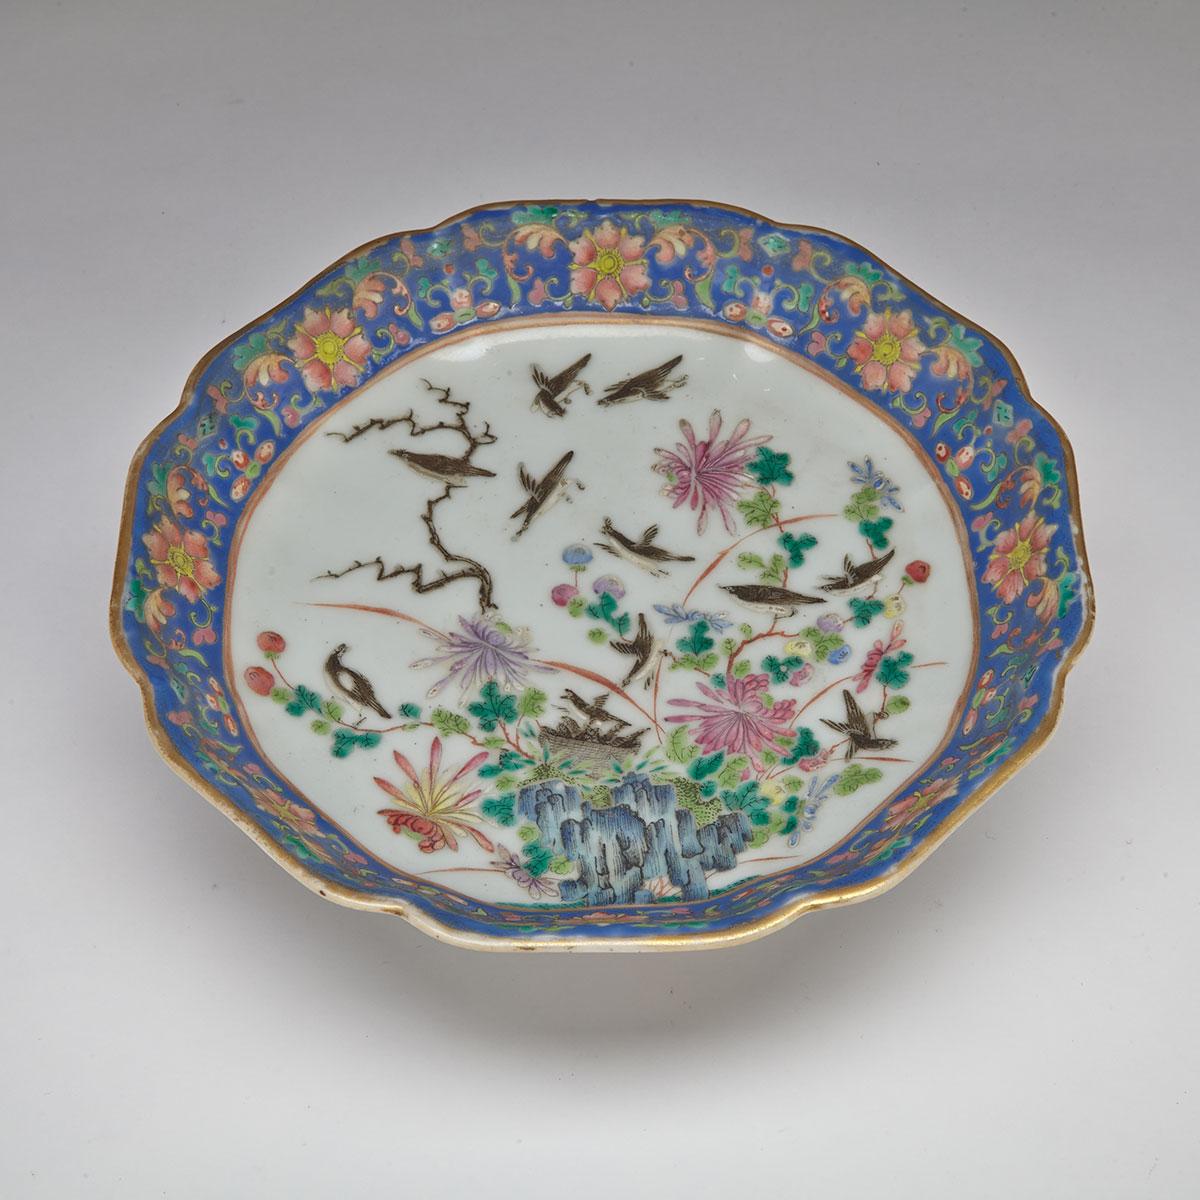 Famille Rose Footed ‘Magpie’ Bowl, Tongzhi Mark and Period (1862-1874)